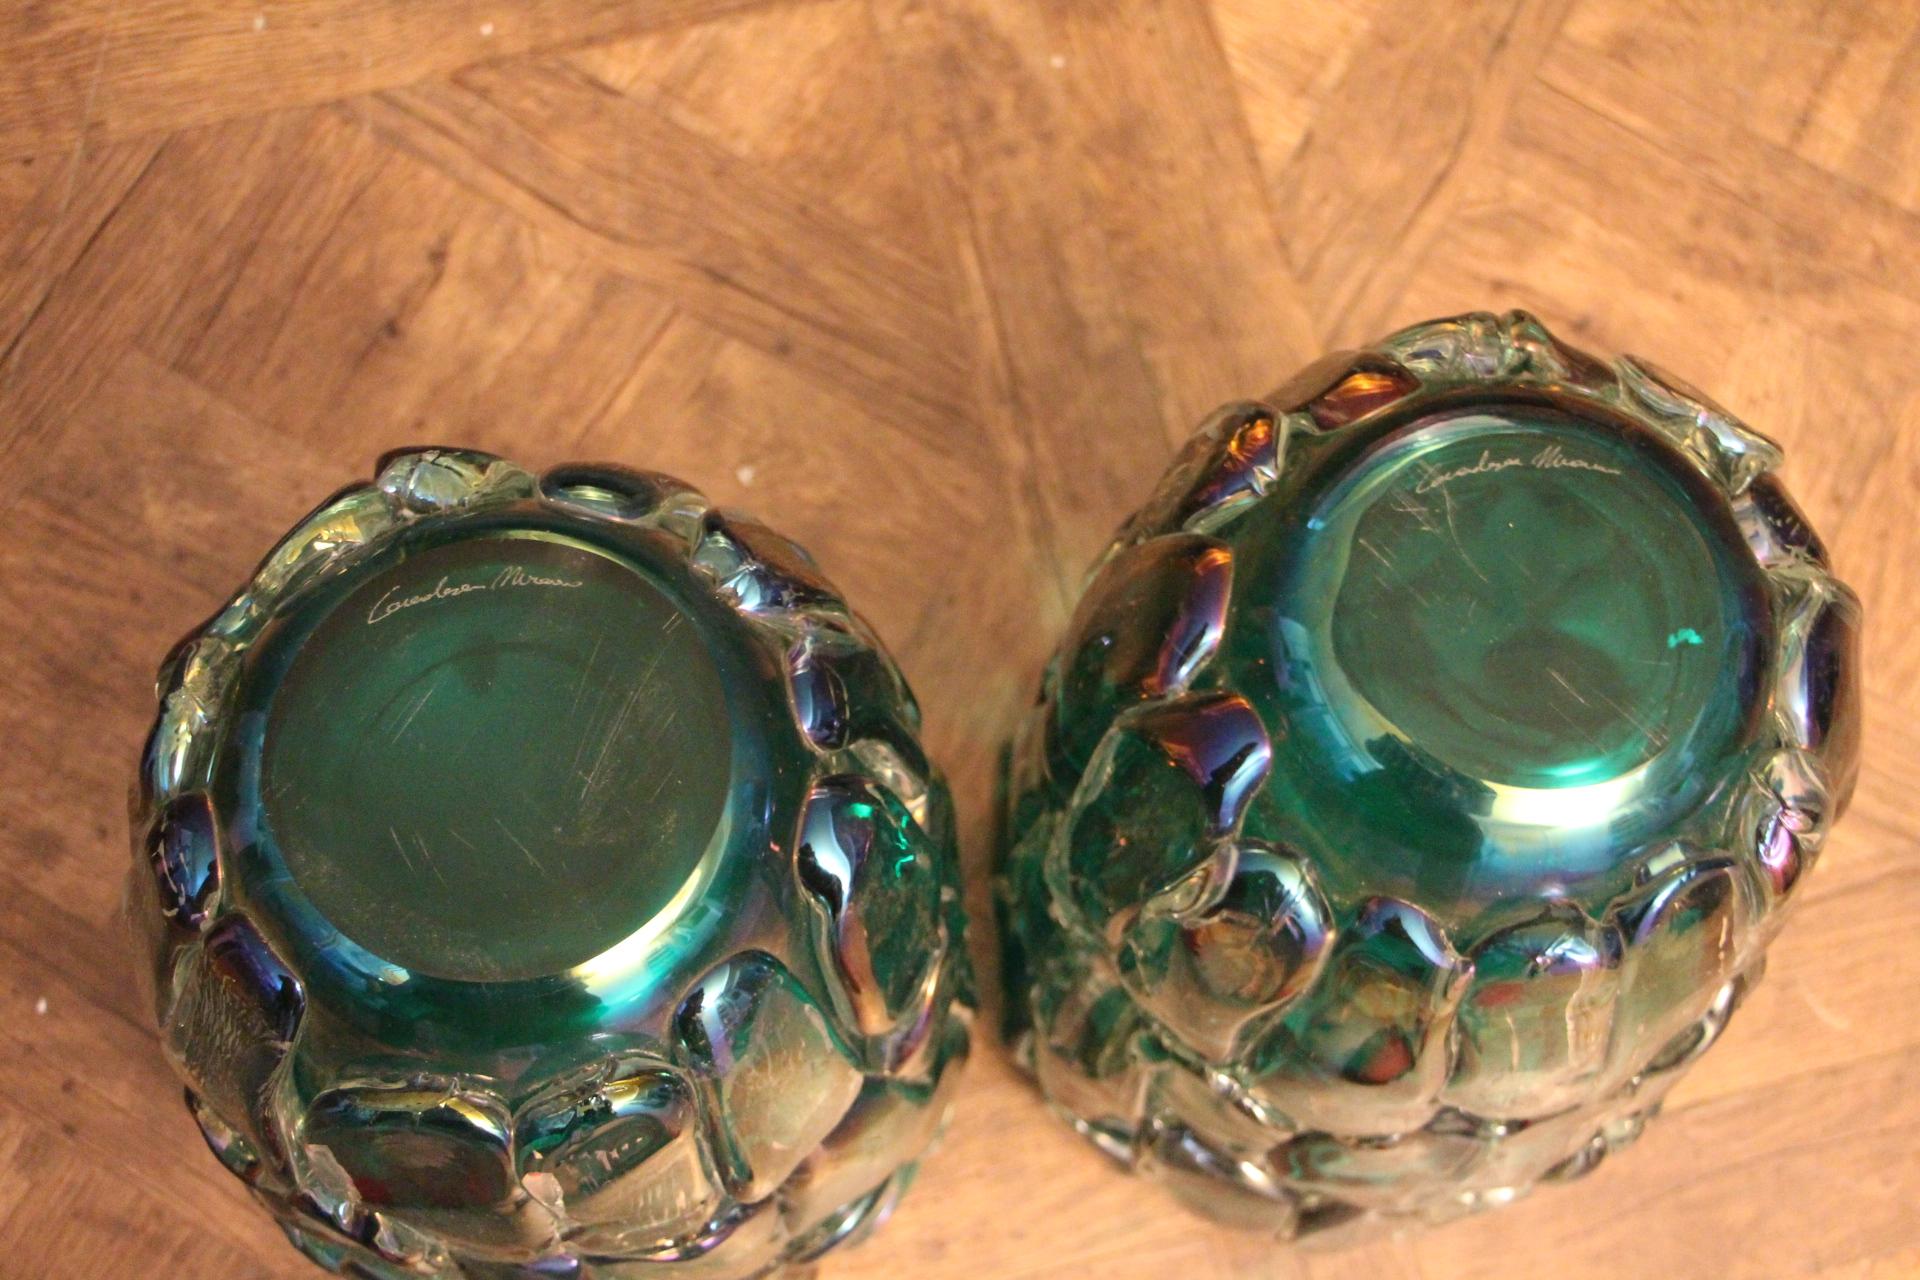 Italian Pair of Large Emerald Green Color and Iridescent Murano Glass Vases by Cenedese